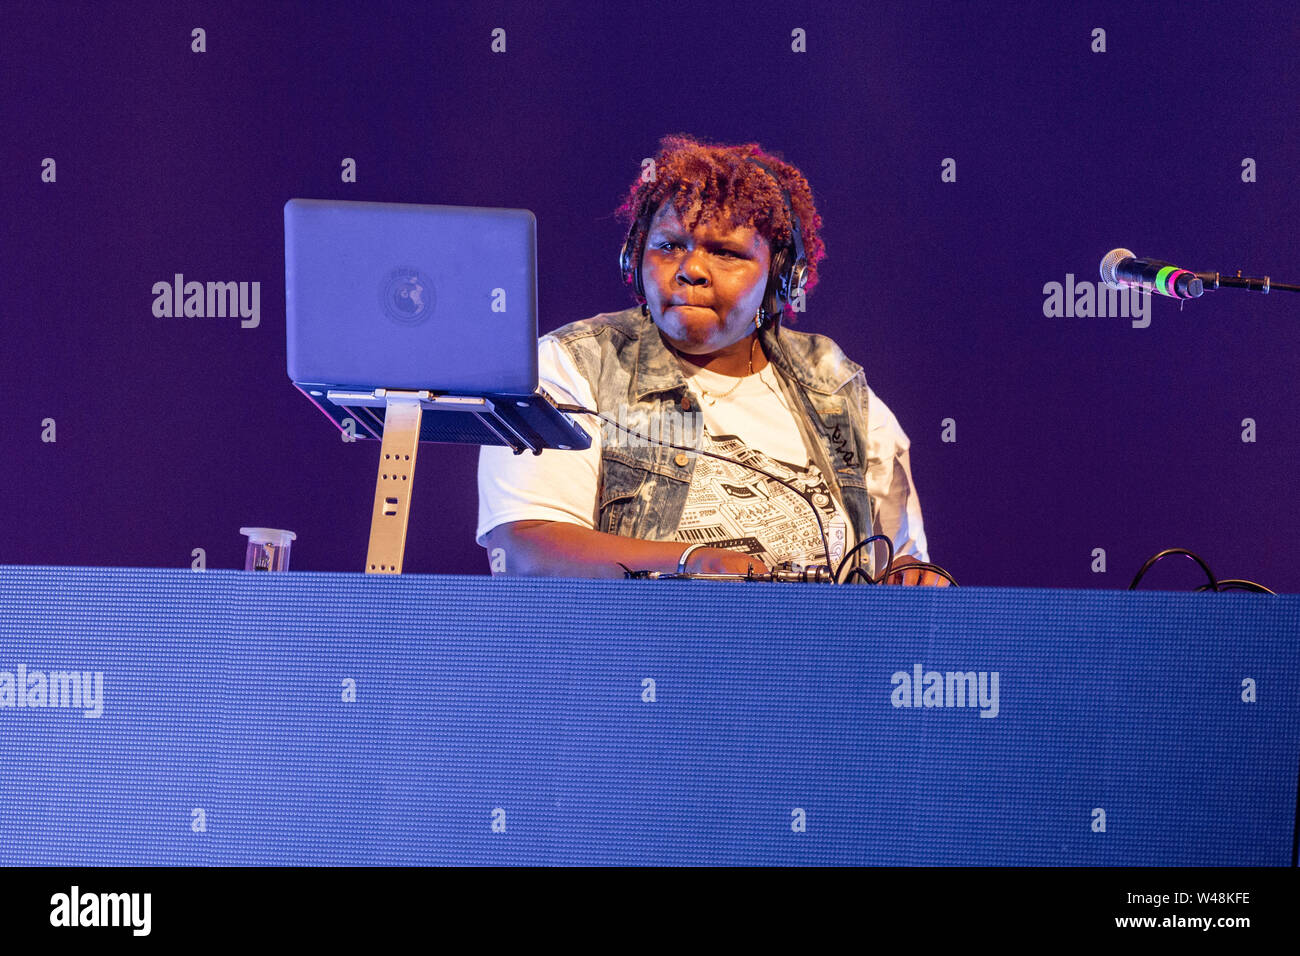 July 20, 2019 - Twin Lakes, Wisconsin, U.S - DJ CUT CUZ during  ComplexCon at McCormick Place in Chicago, Illinois (Credit Image: © Daniel DeSlover/ZUMA Wire) Stock Photo